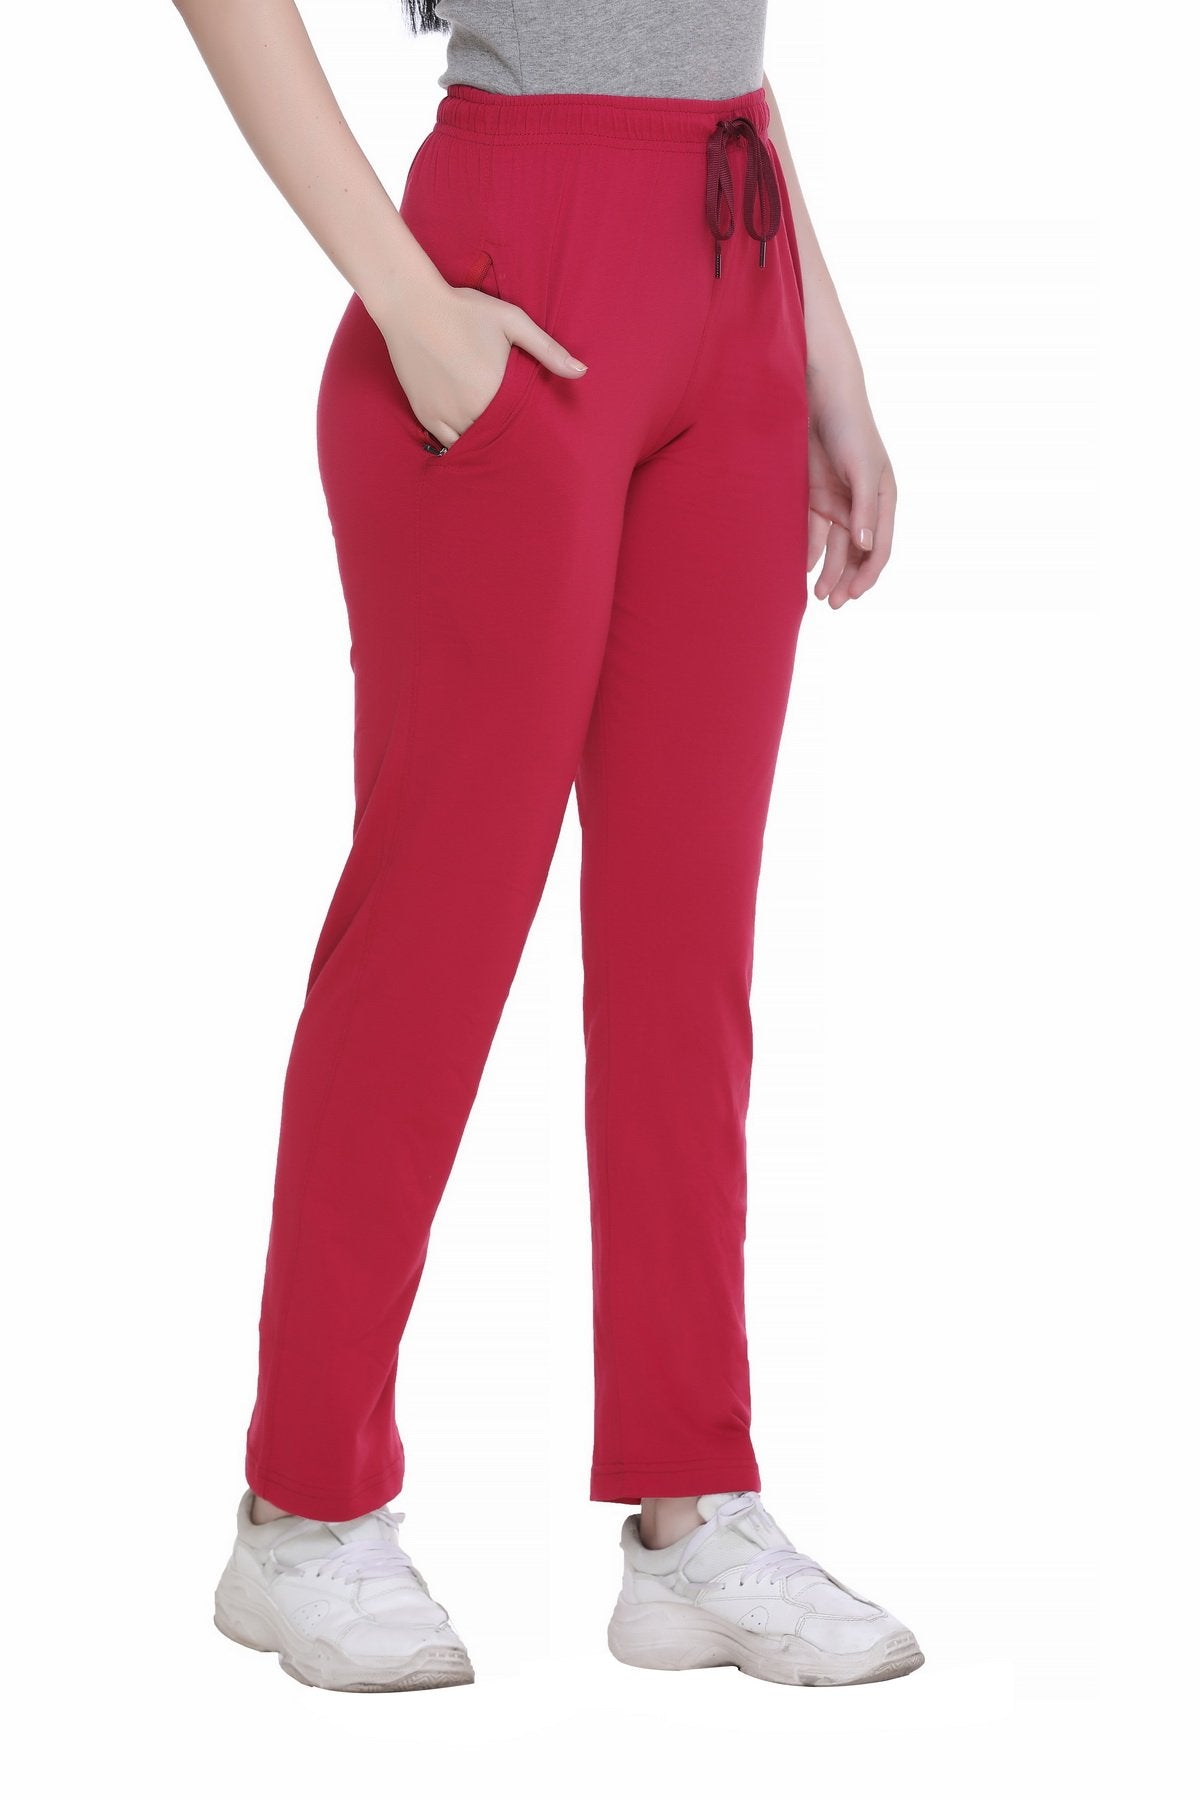 Diaz Plain Stylish Strip Track Pants for Women for Daily use | Cotton –  NavaStreet - Europe